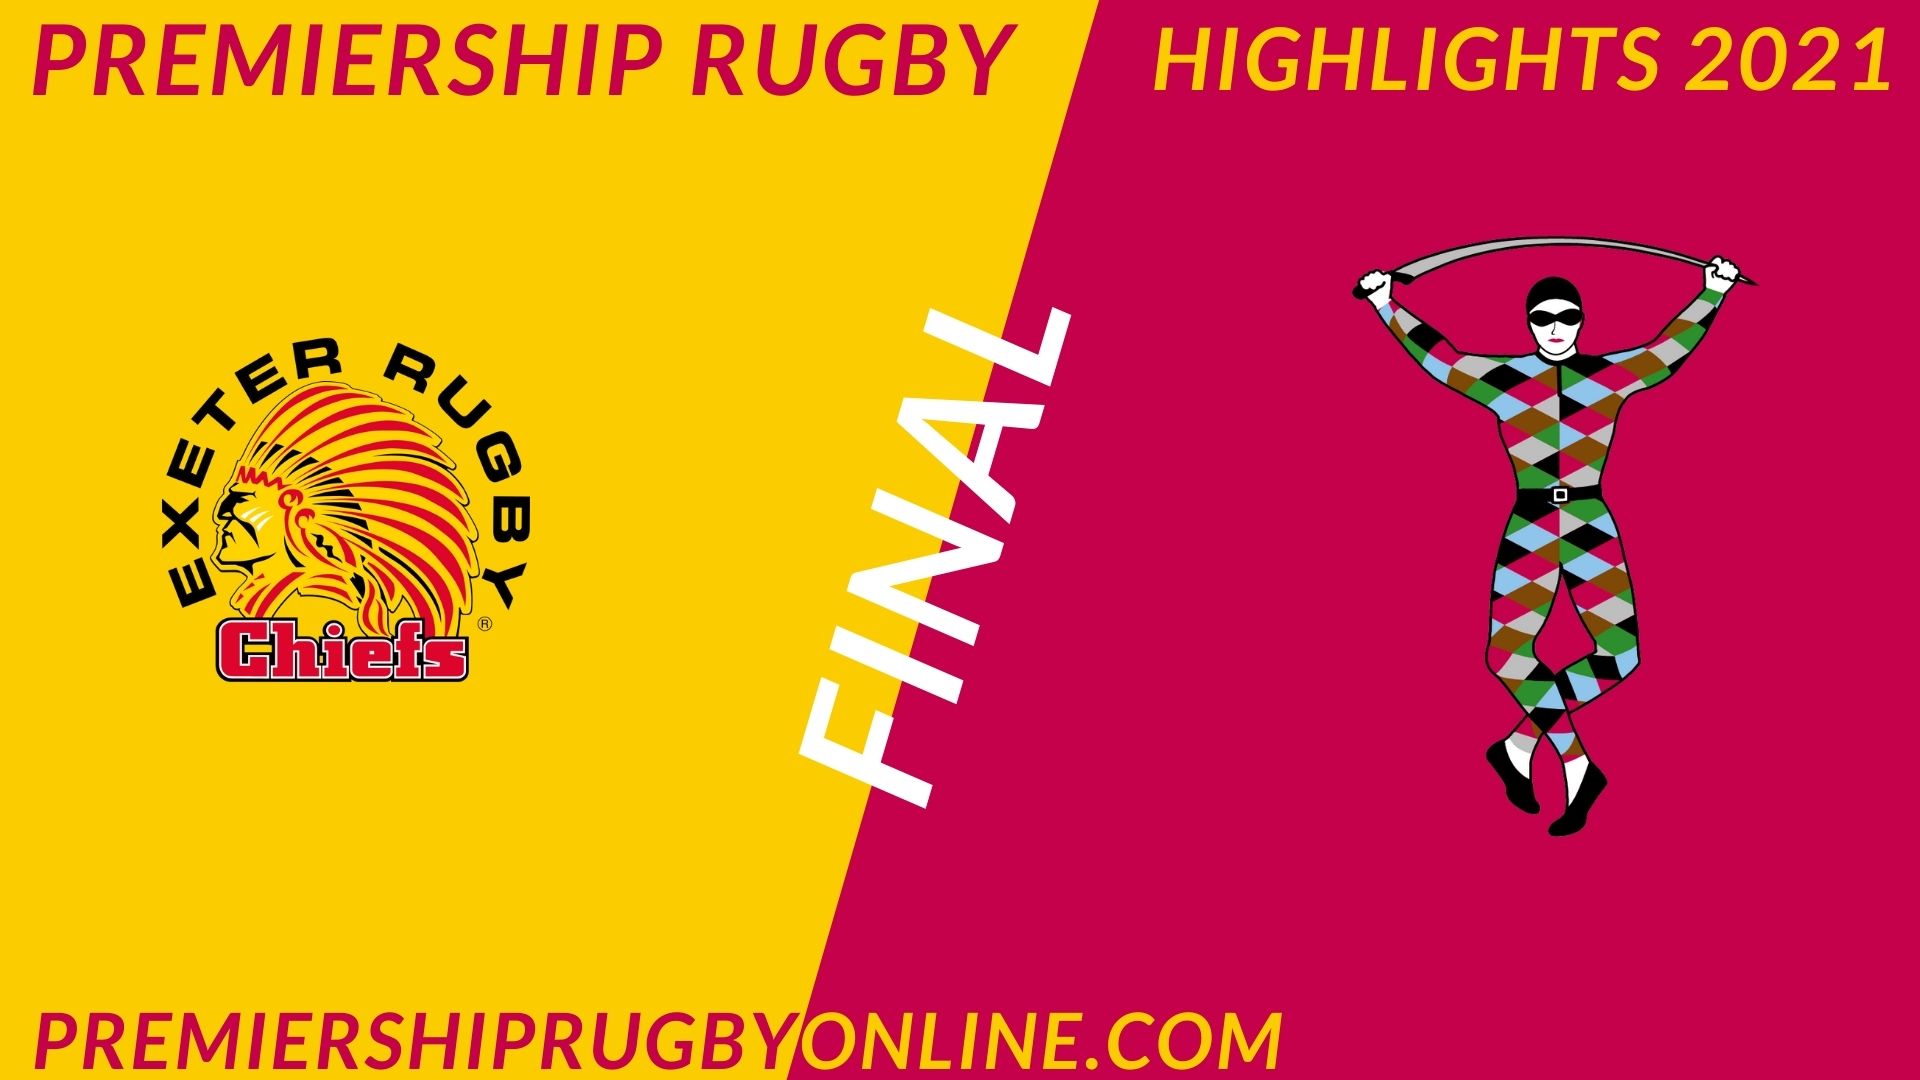 Exeter Chiefs Vs Harlequins Highlights 2021 Final